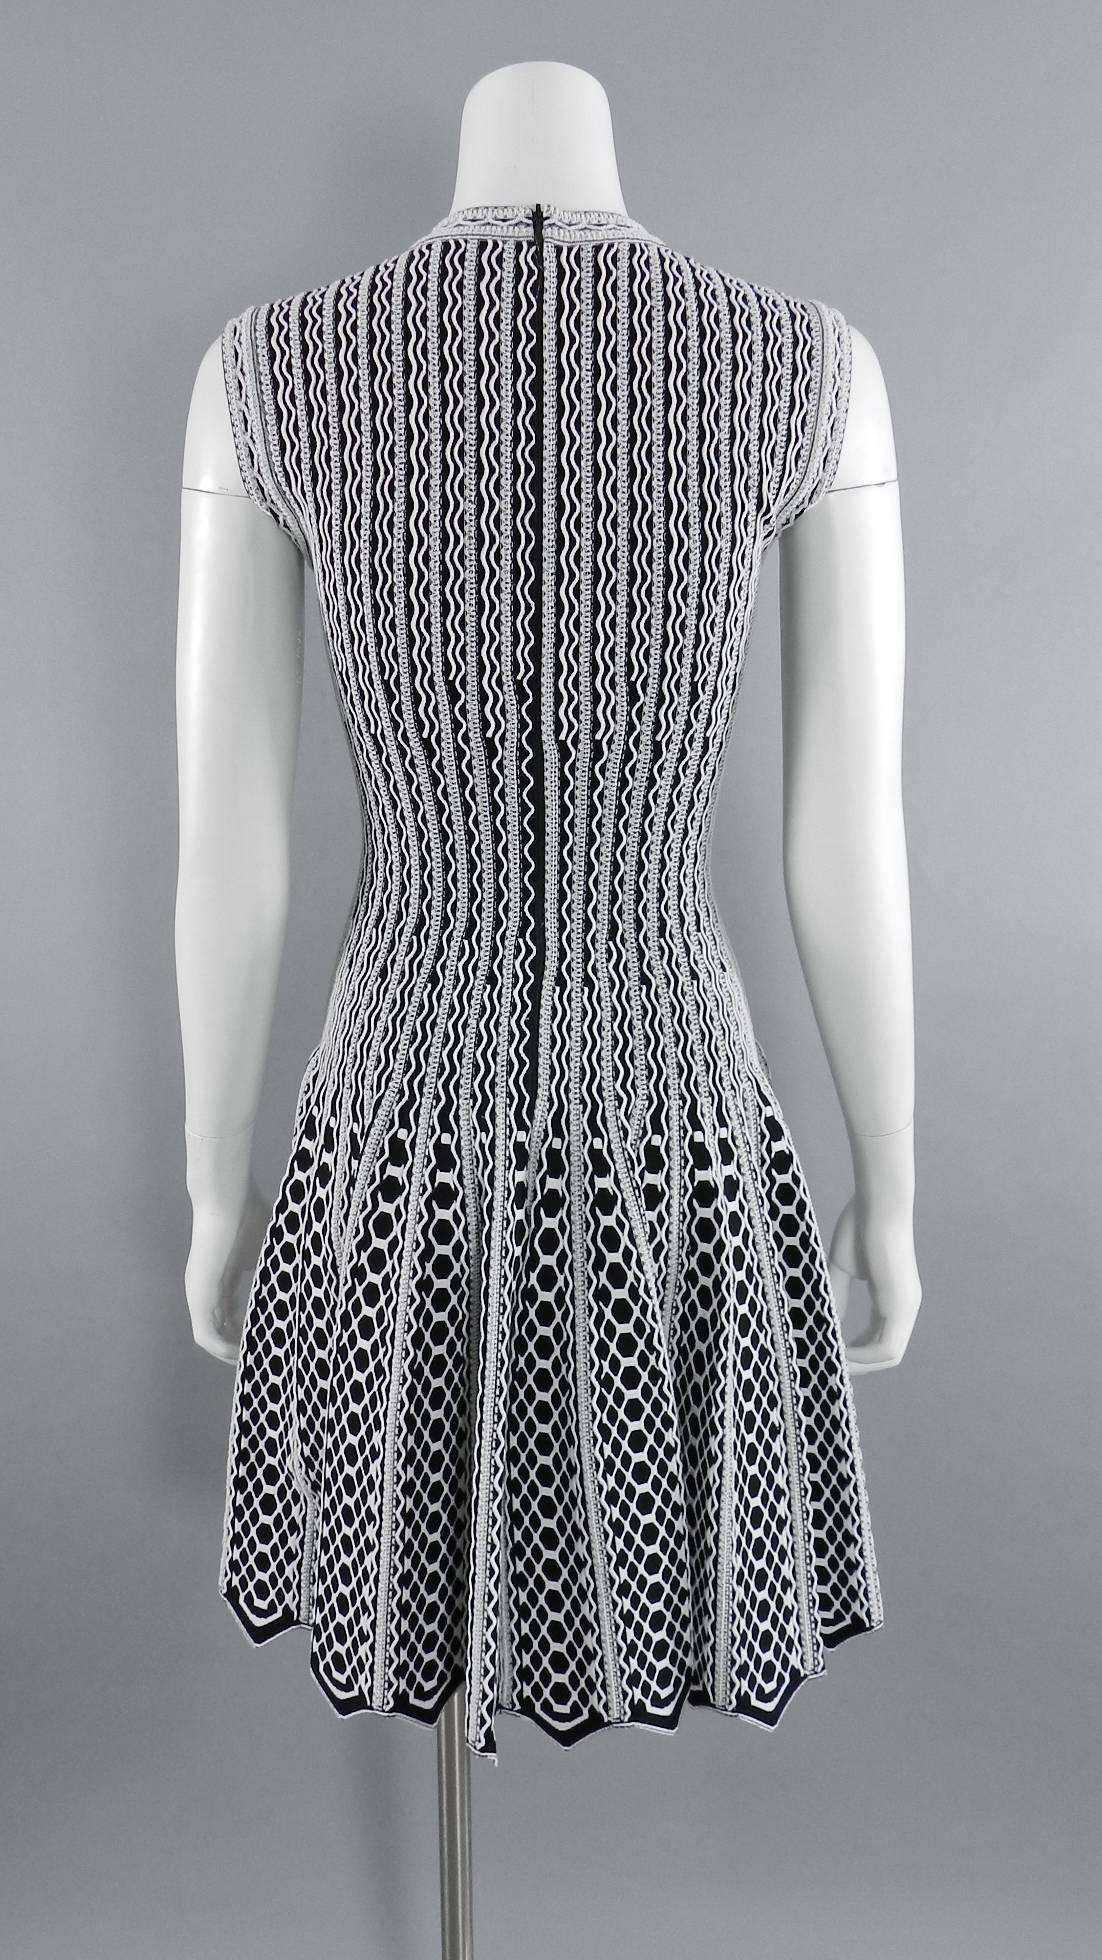 Alaia White and Black Fit and Flare Stretch Knit Dress 1